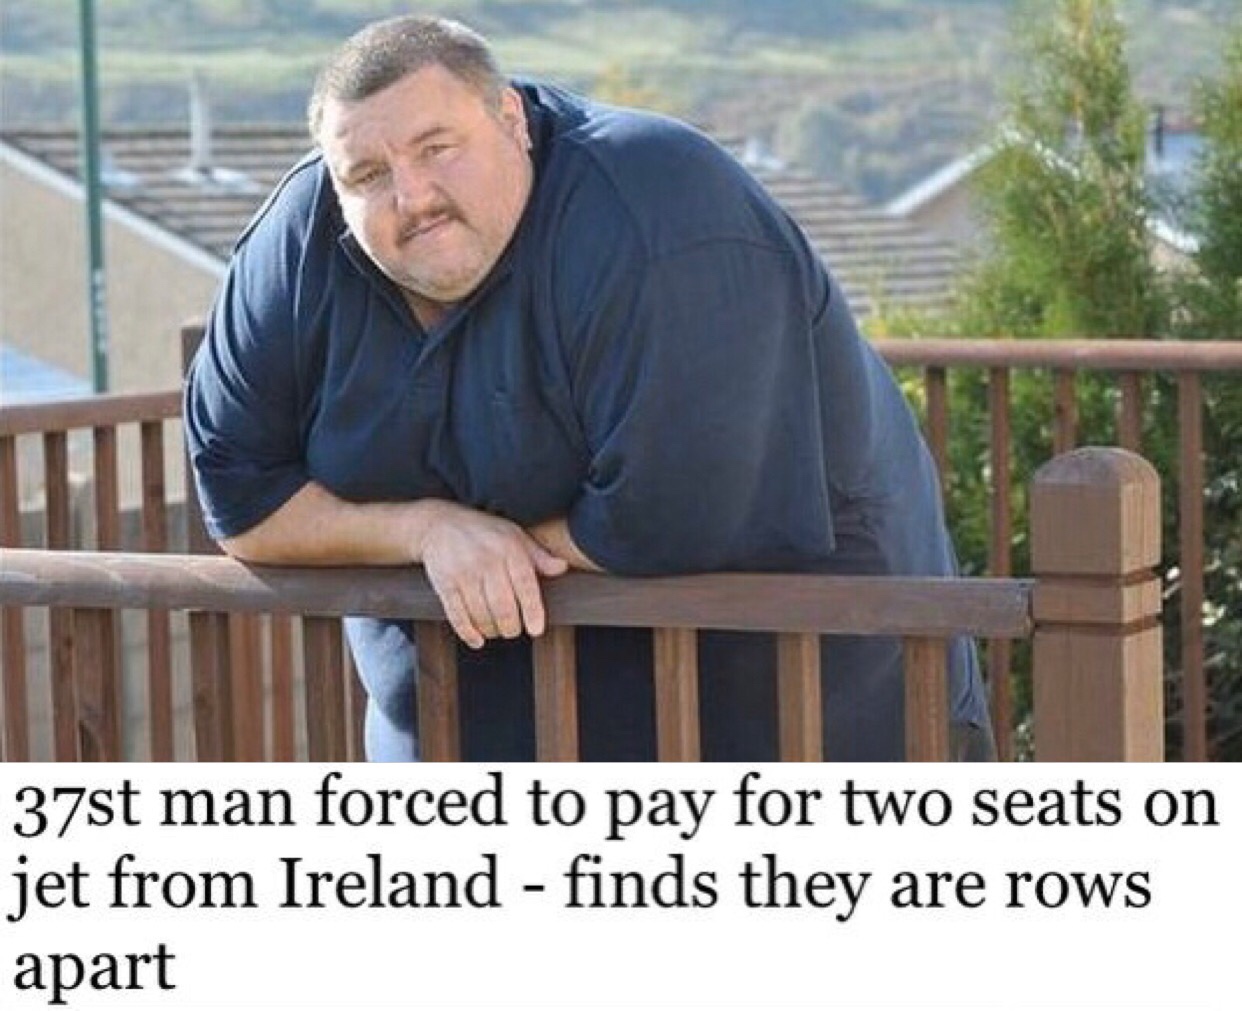 photo caption - 37st man forced to pay for two seats on jet from Ireland finds they are rows apart